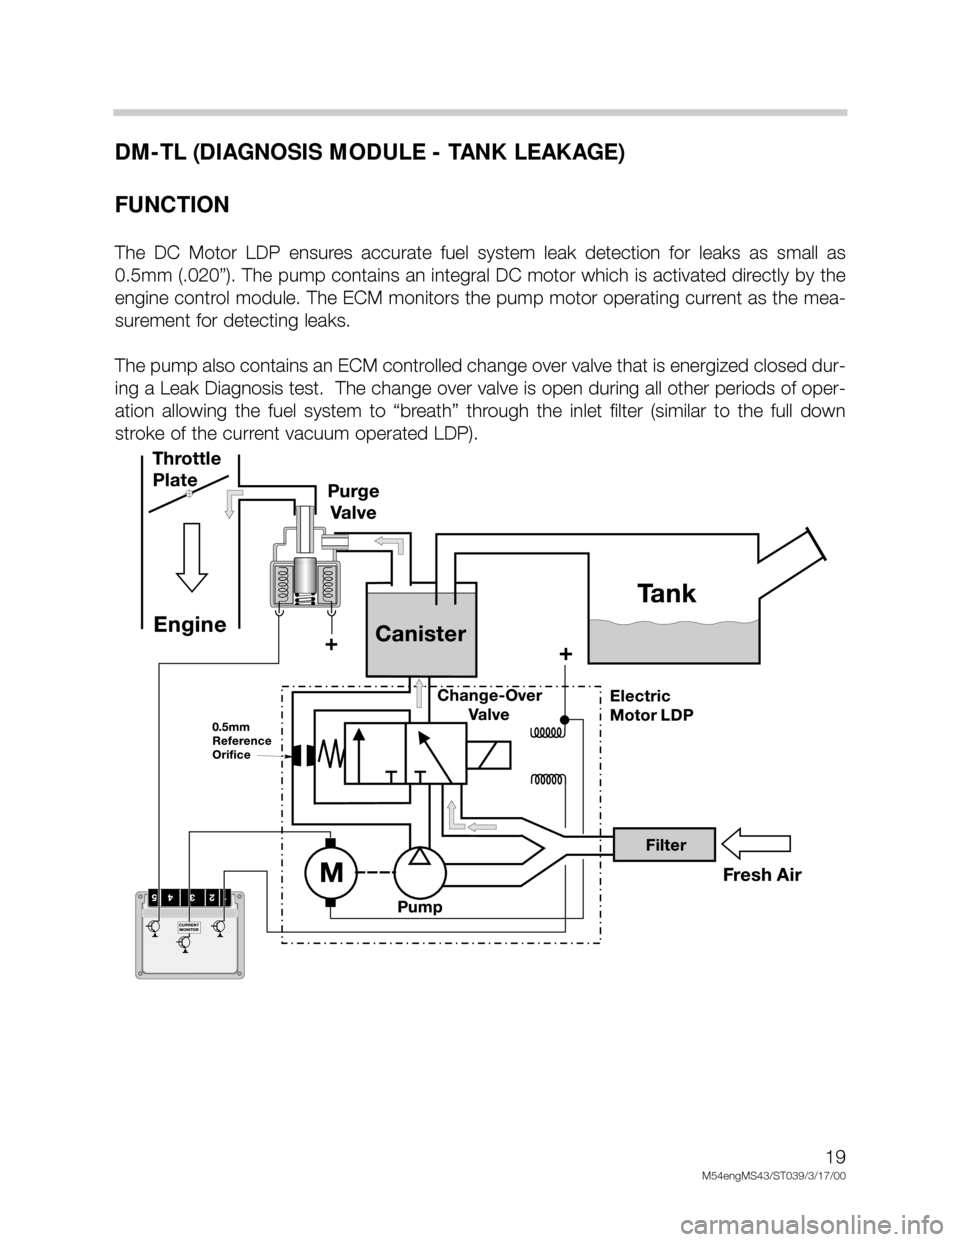 BMW X5 2005 E53 M54 Engine Workshop Manual 19
M54engMS43/ST039/3/17/00
DM-TL (DIAGNOSIS MODULE - TANK LEAKAGE)
FUNCTION
The  DC  Motor  LDP  ensures  accurate  fuel  system  leak  detection  for  leaks  as  small  as
0.5mm (.020”). The pump 